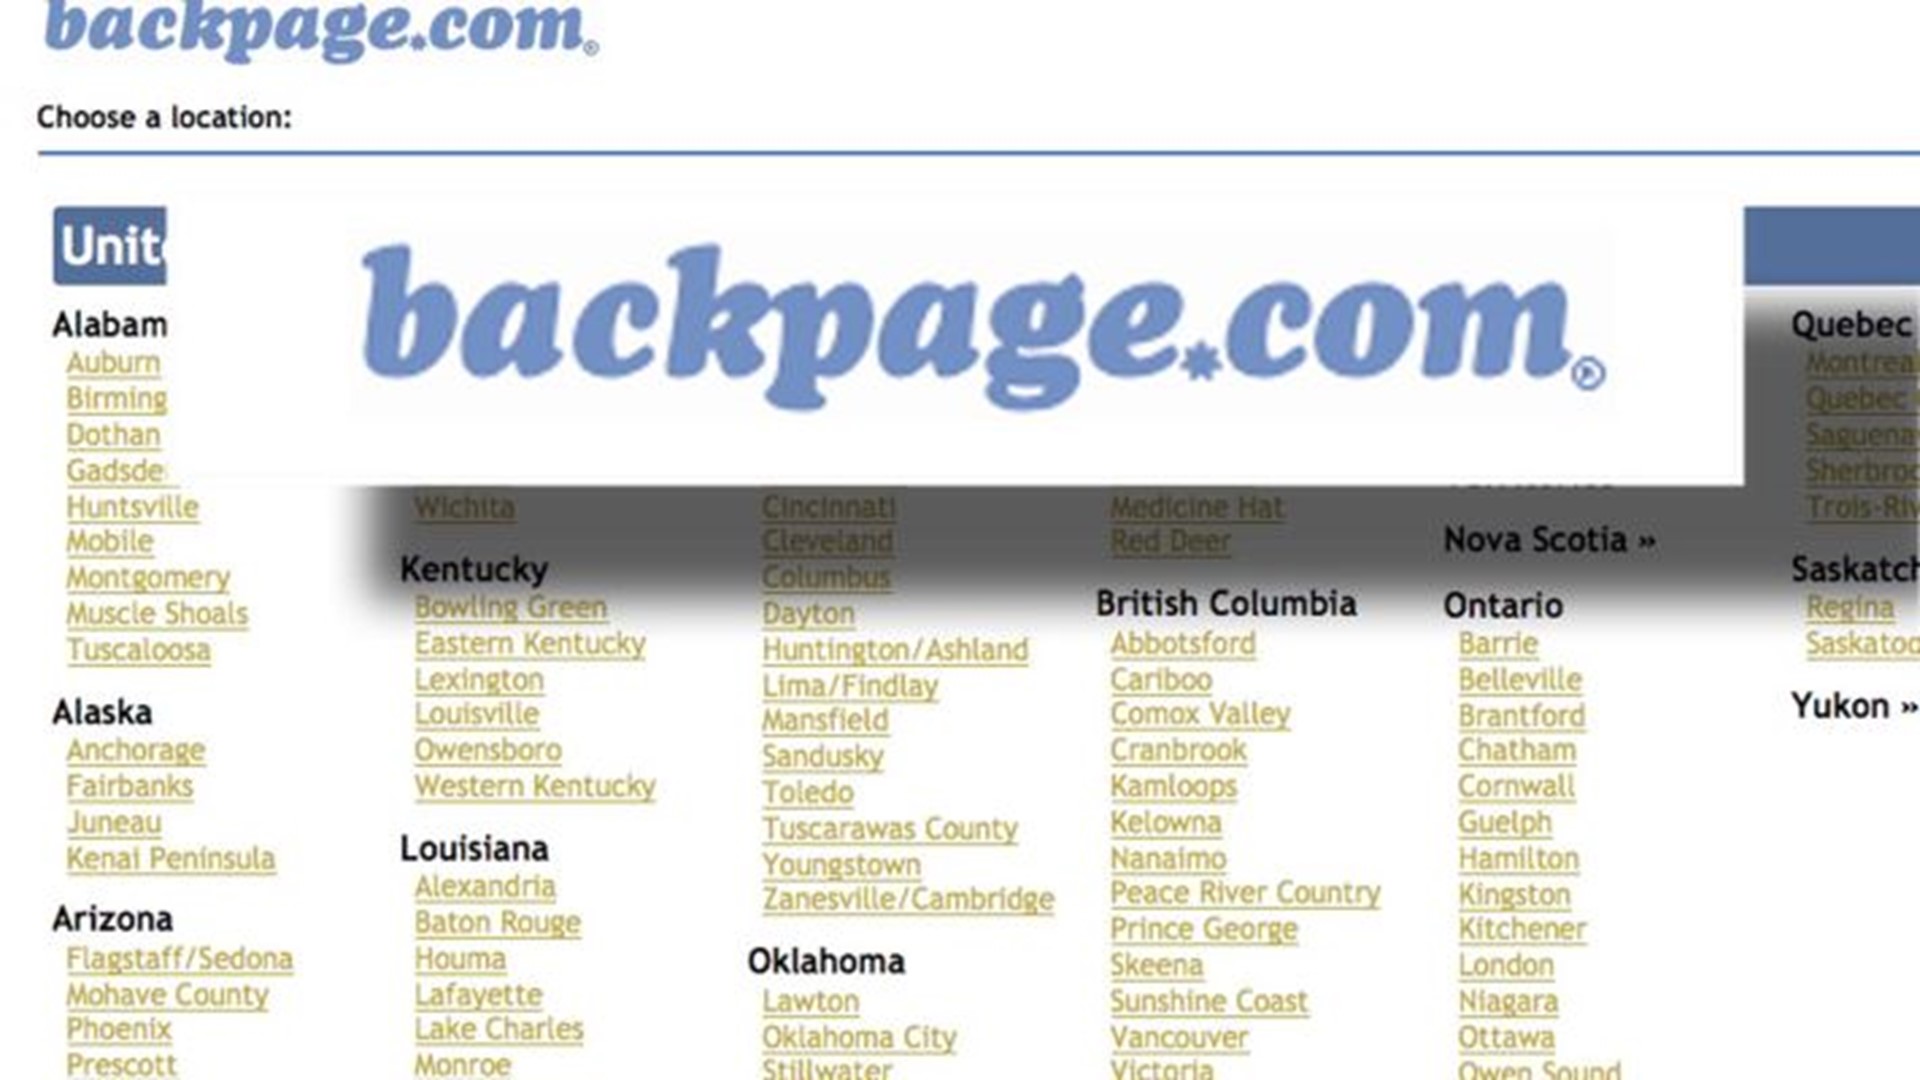 dan bloomberg recommends eastern north carolina backpage pic